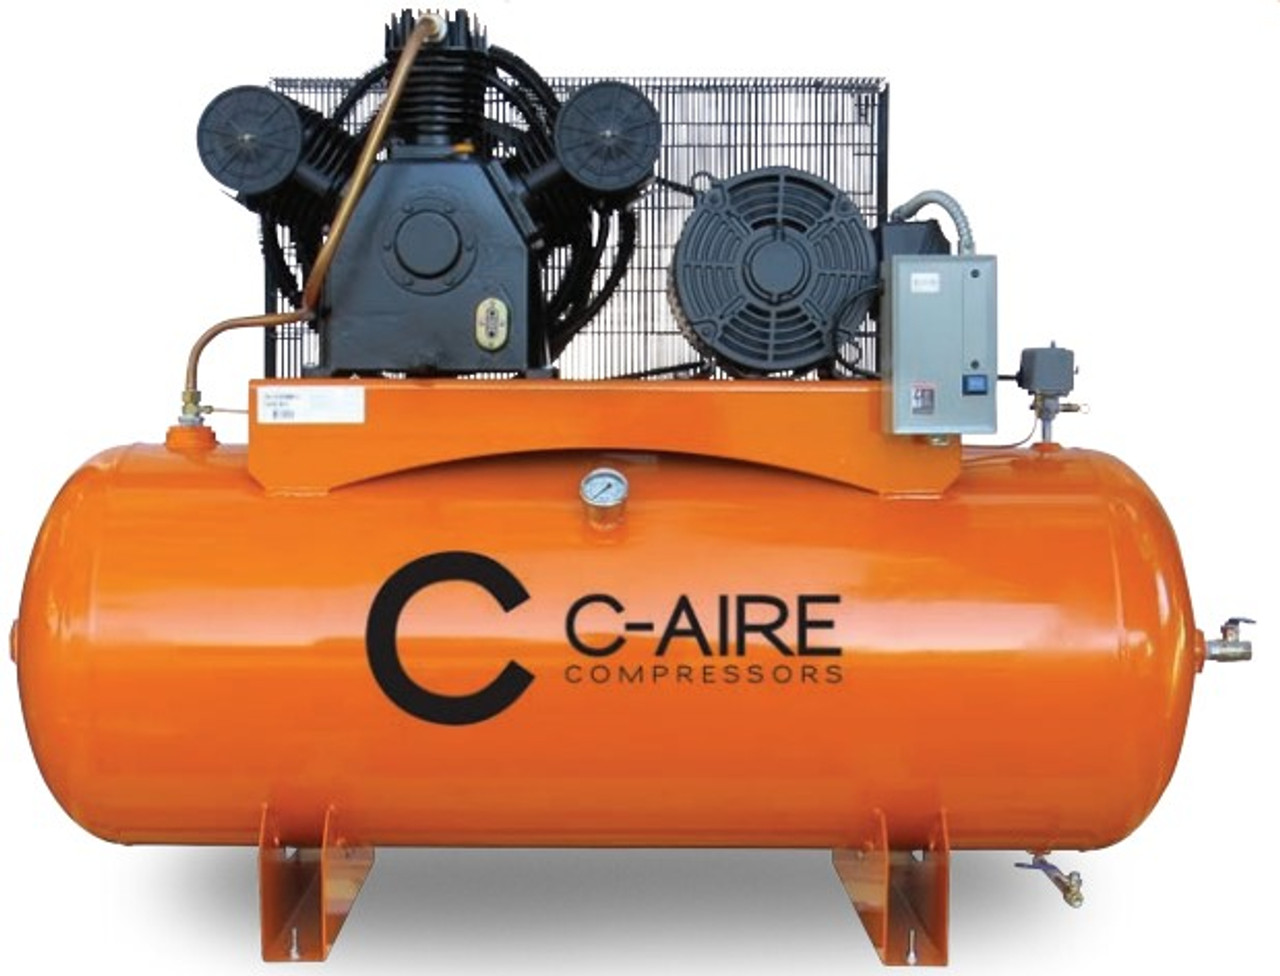 C-Aire A150H120-3230FP 15 HP 208/230 Volt Three Phase Full Featured Two Stage 120 Gallon Air Compressor